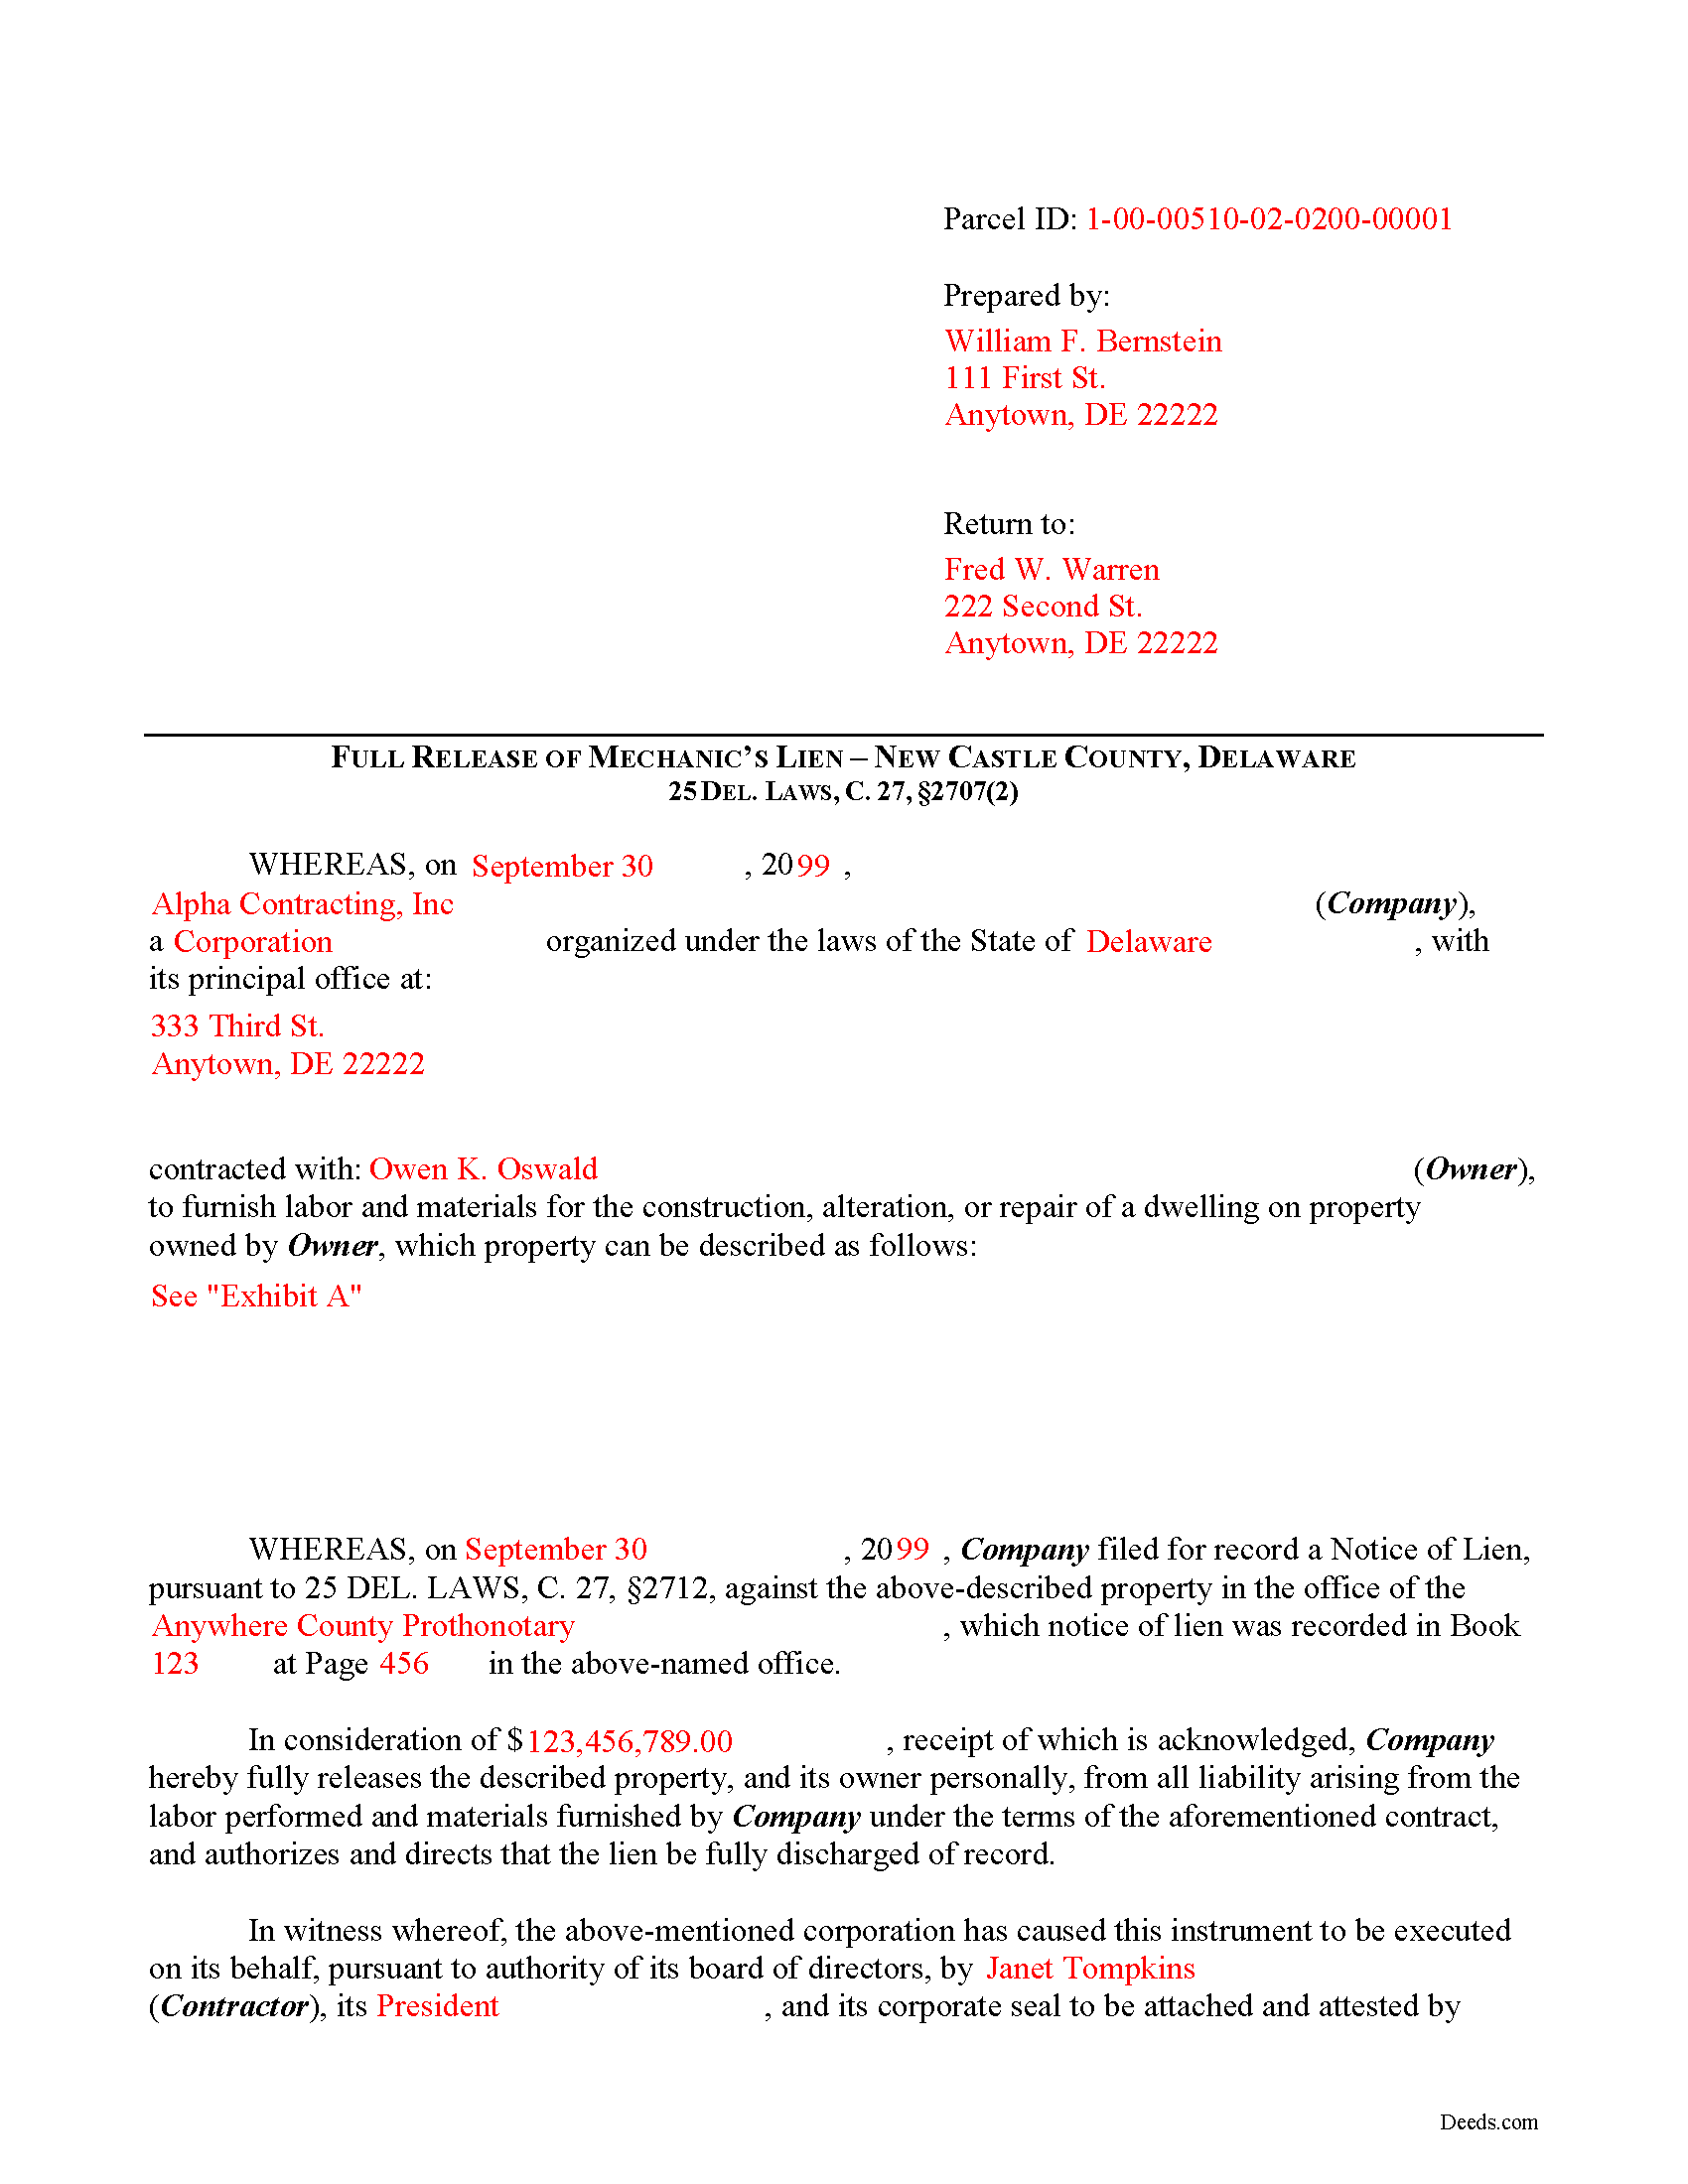 New Castle County Completed Example of the Lien Release Document